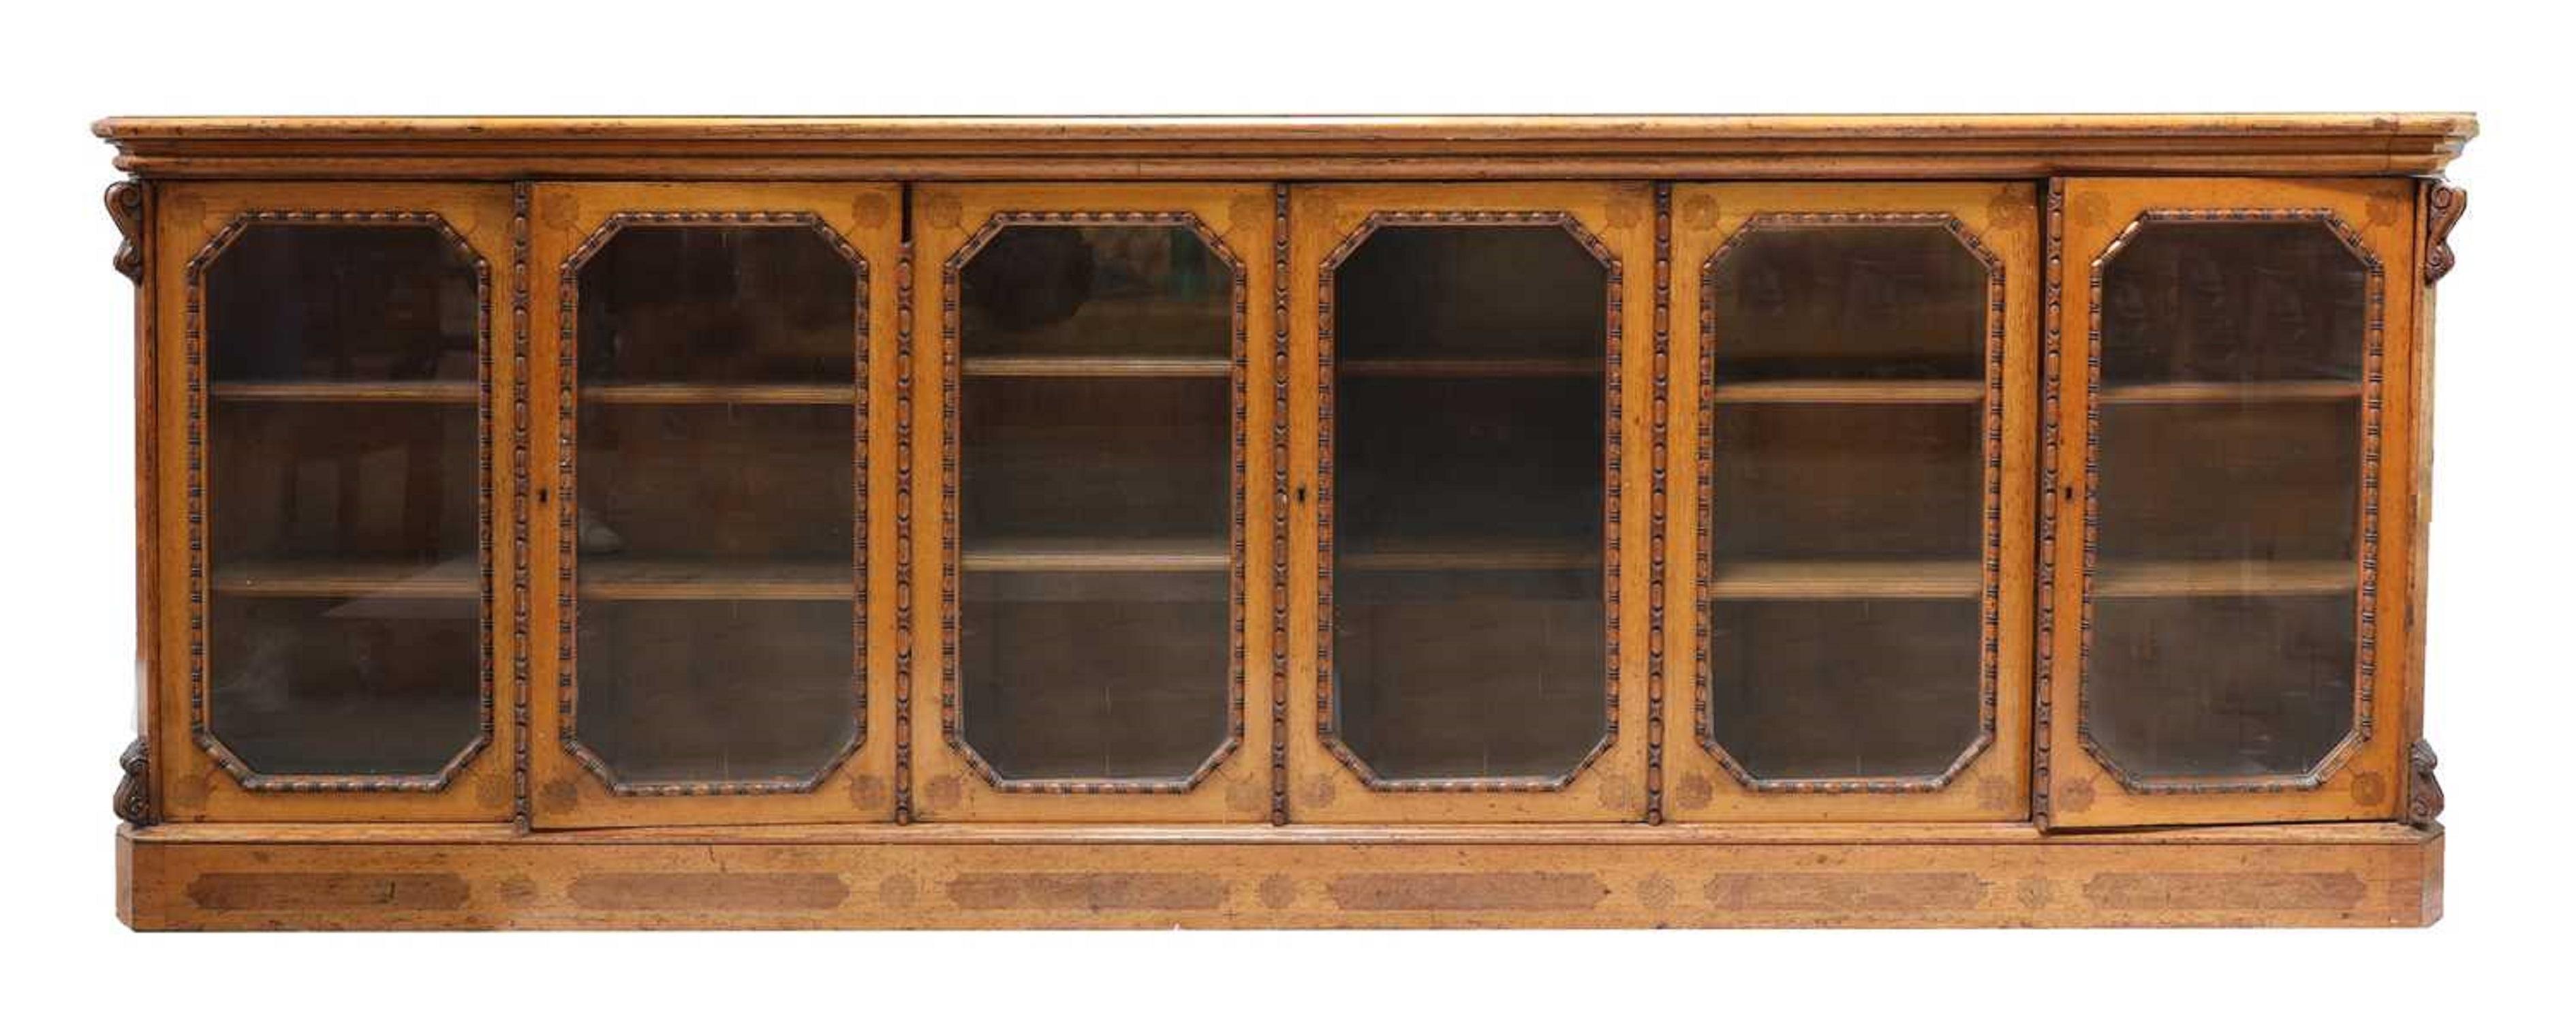 For sale is a good quality large Victorian oak inlaid six door bookcase, remaining in good condition for its age, showing minor signs of wear commensurate with age and use.

Measures: Height = 112 cm (44.1